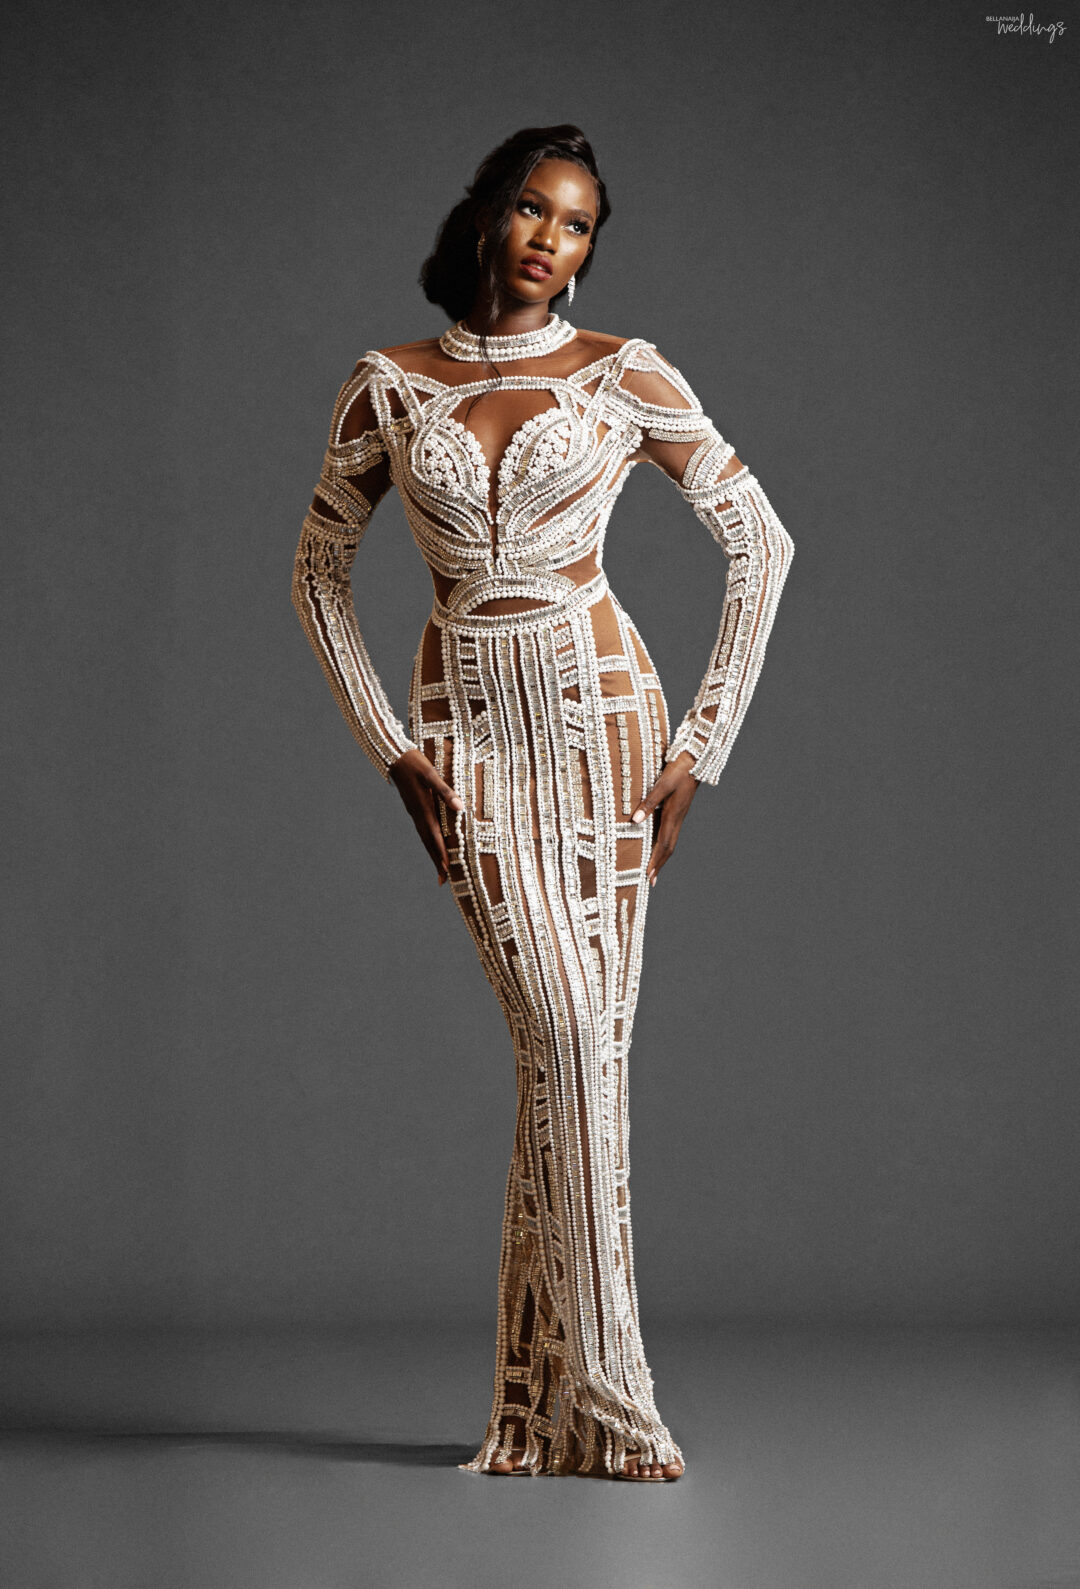 The Matopeda Bridal 2021 Collection is an Array of Opulence